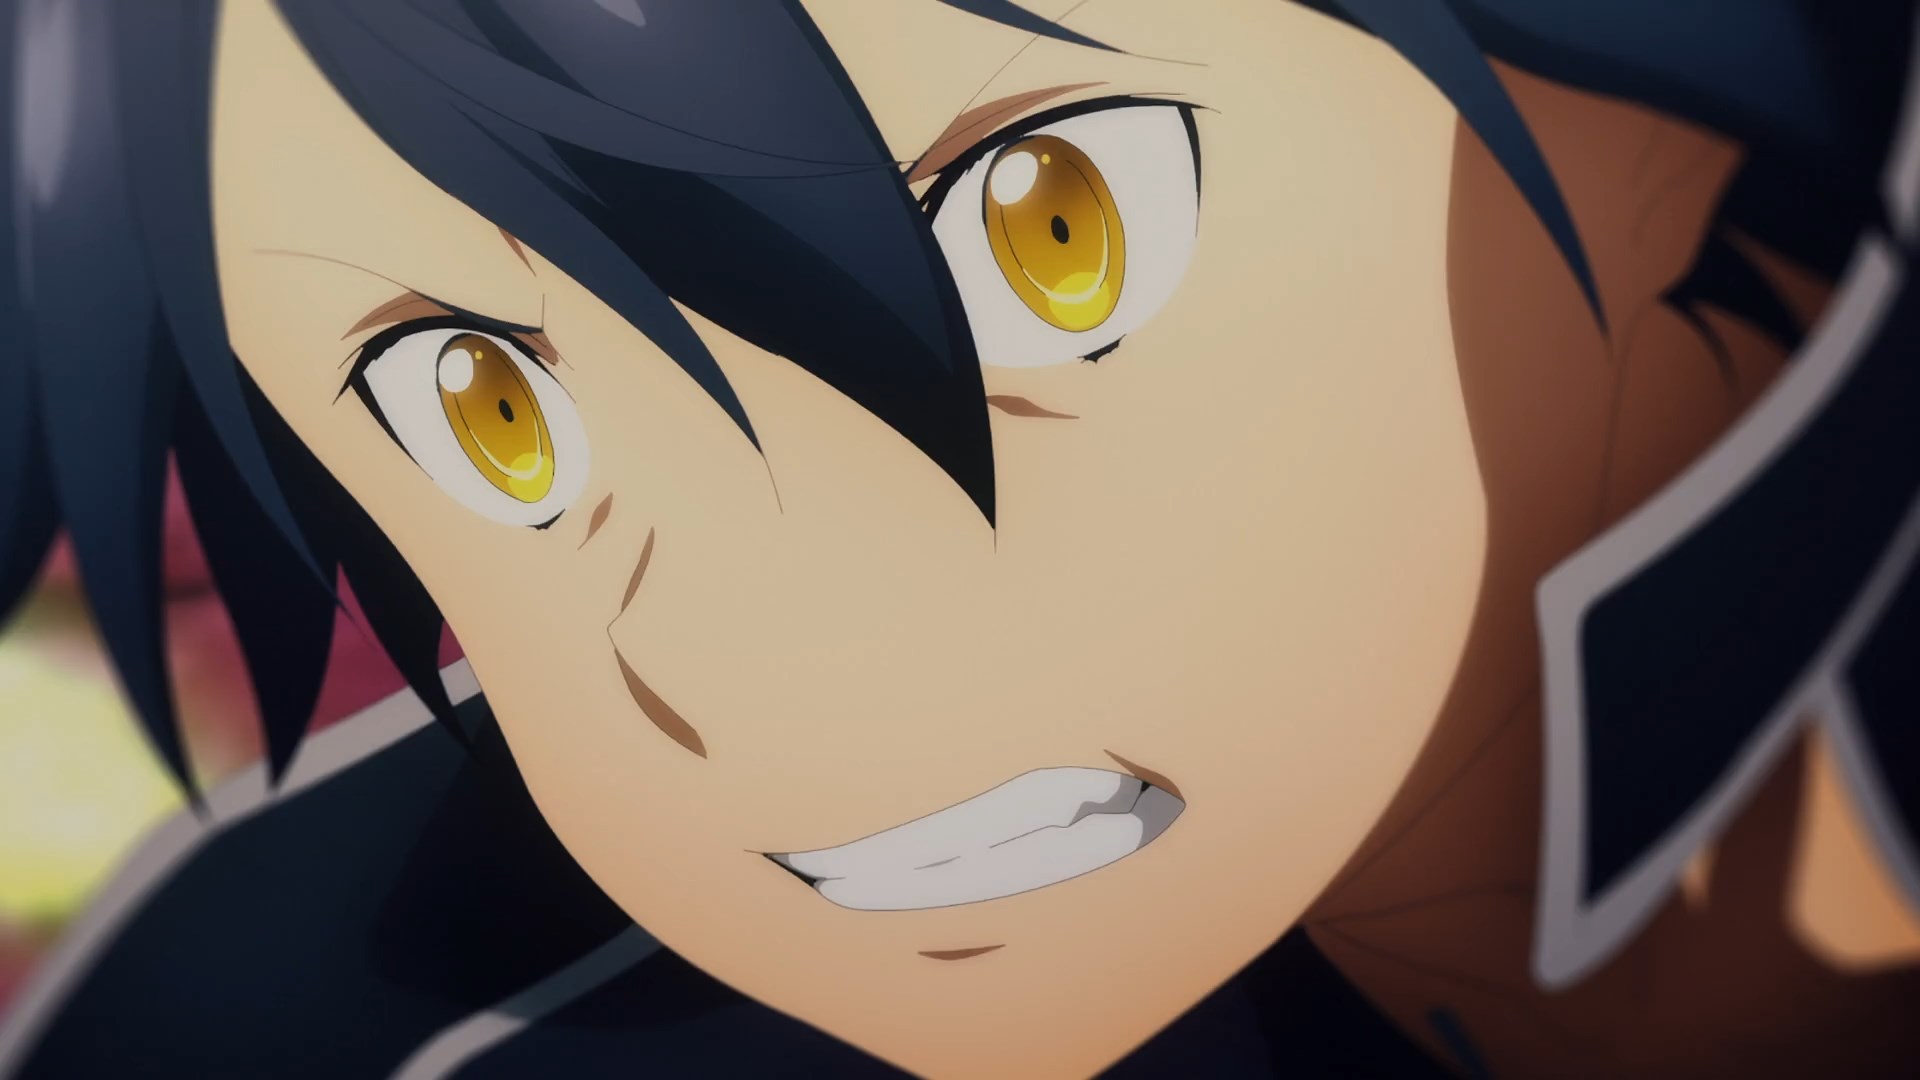 KIRITO IS BACK WITH GOLDEN EYES!!!